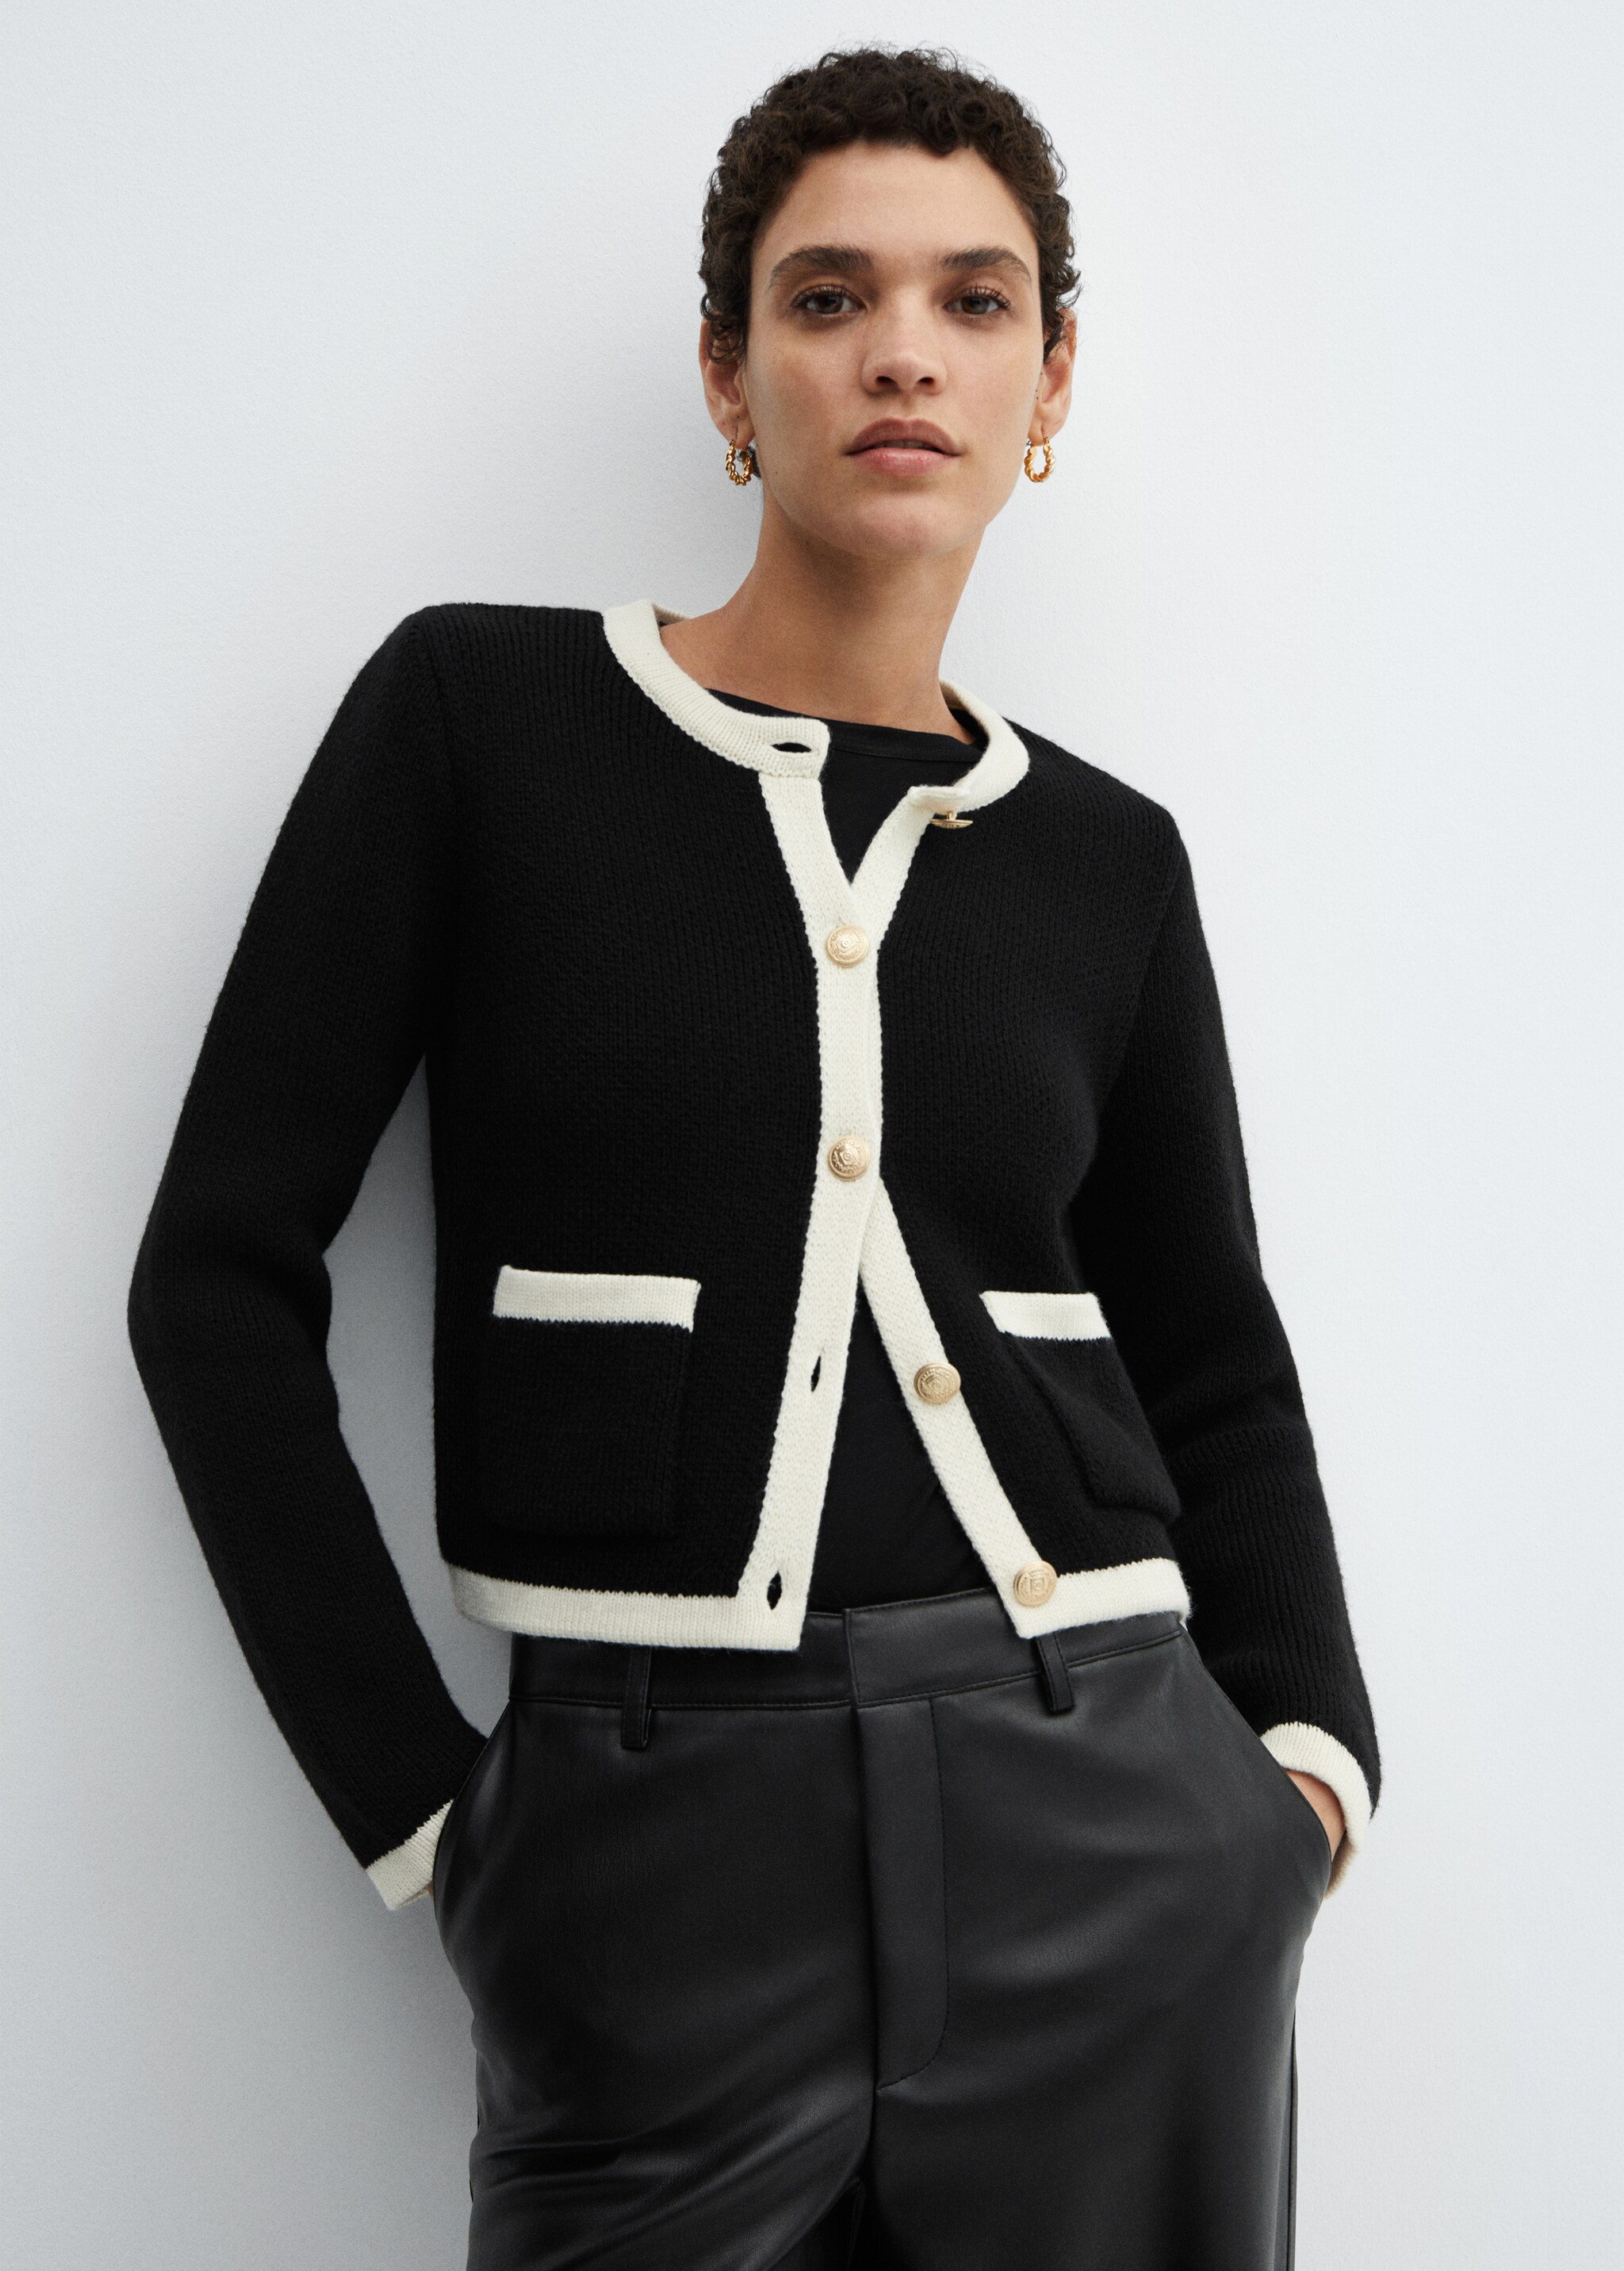 Knitted buttoned jacket - Medium plane